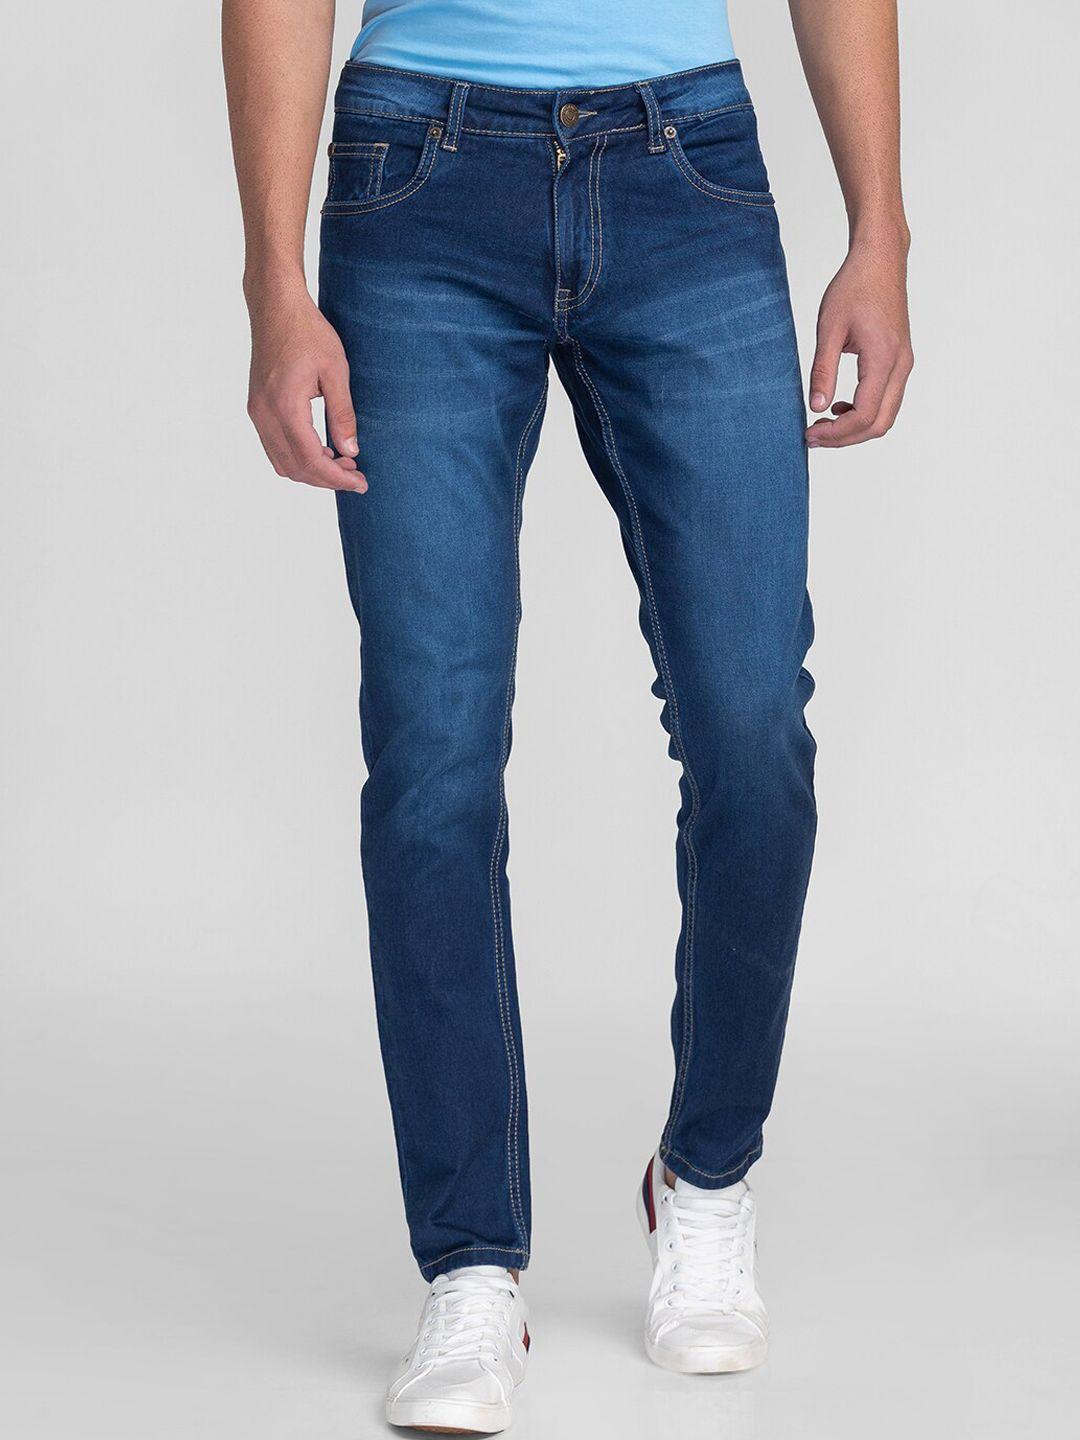 giordano men slim fit light fade stretchable jeans